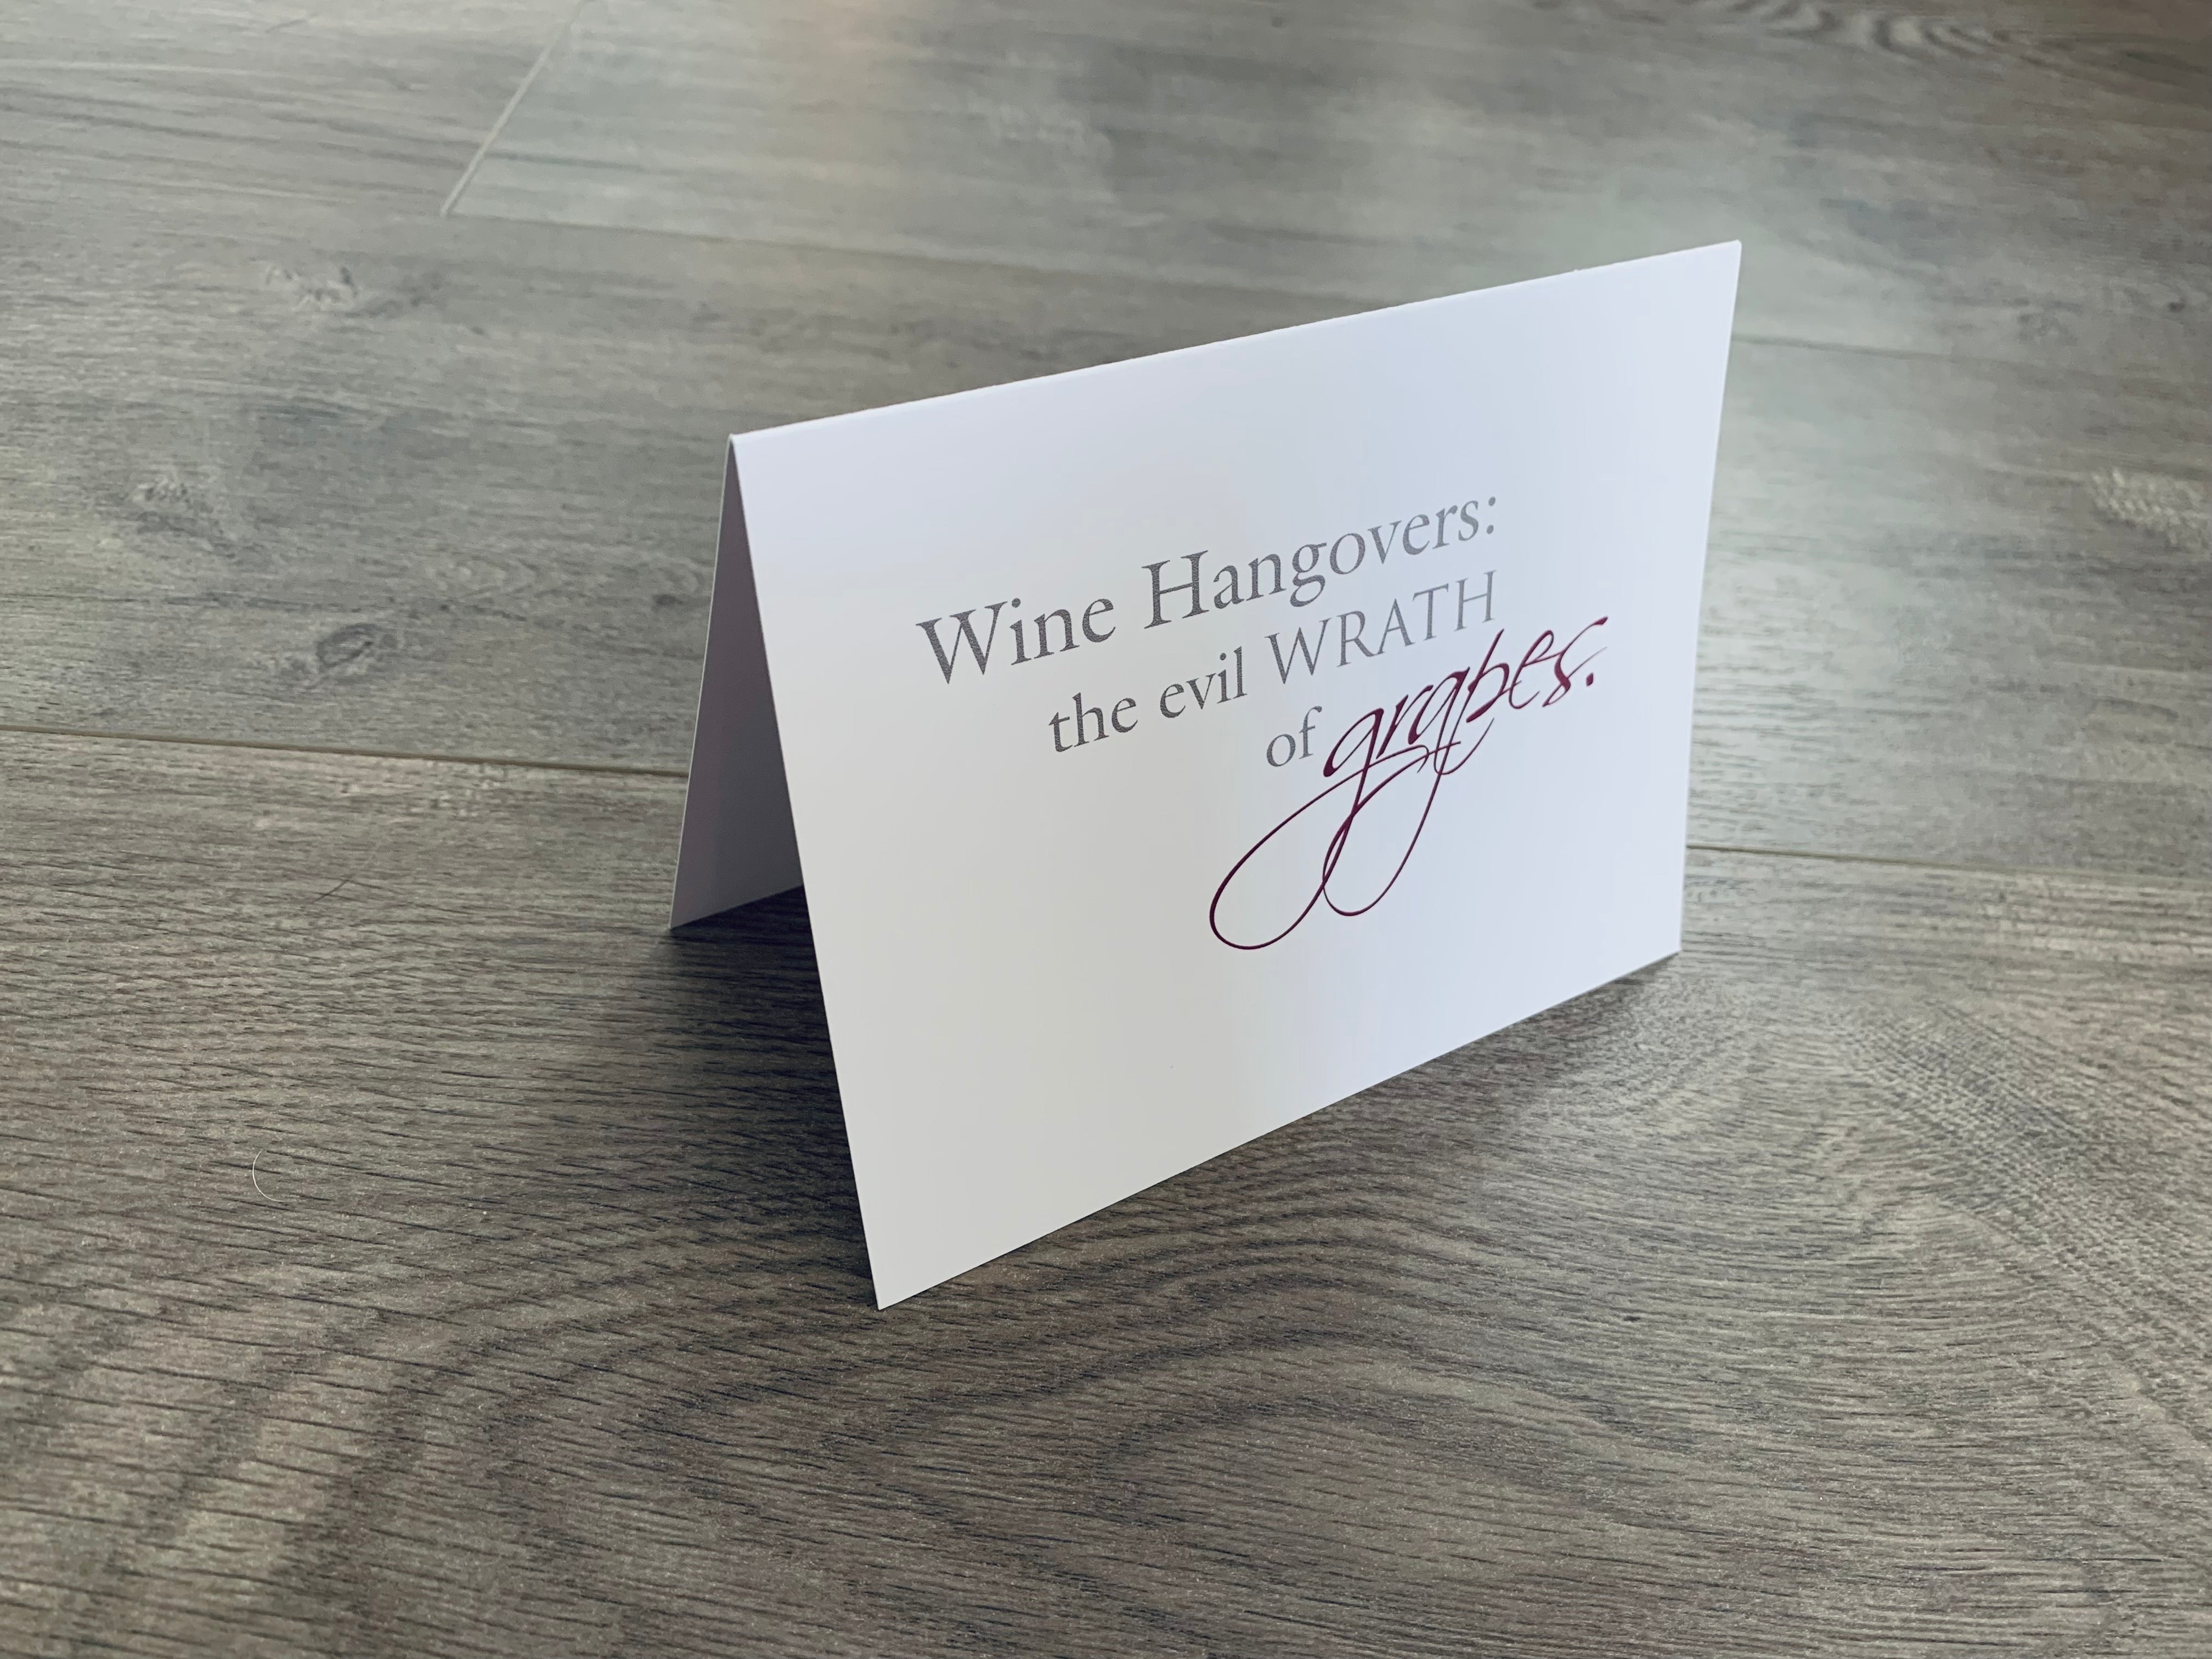 A white notecard from Stationare's Wine and Champagne Lovers' collection is propped up on a gray wooden floor. It reads, "Wine hangovers: the evil wrath of grapes." 